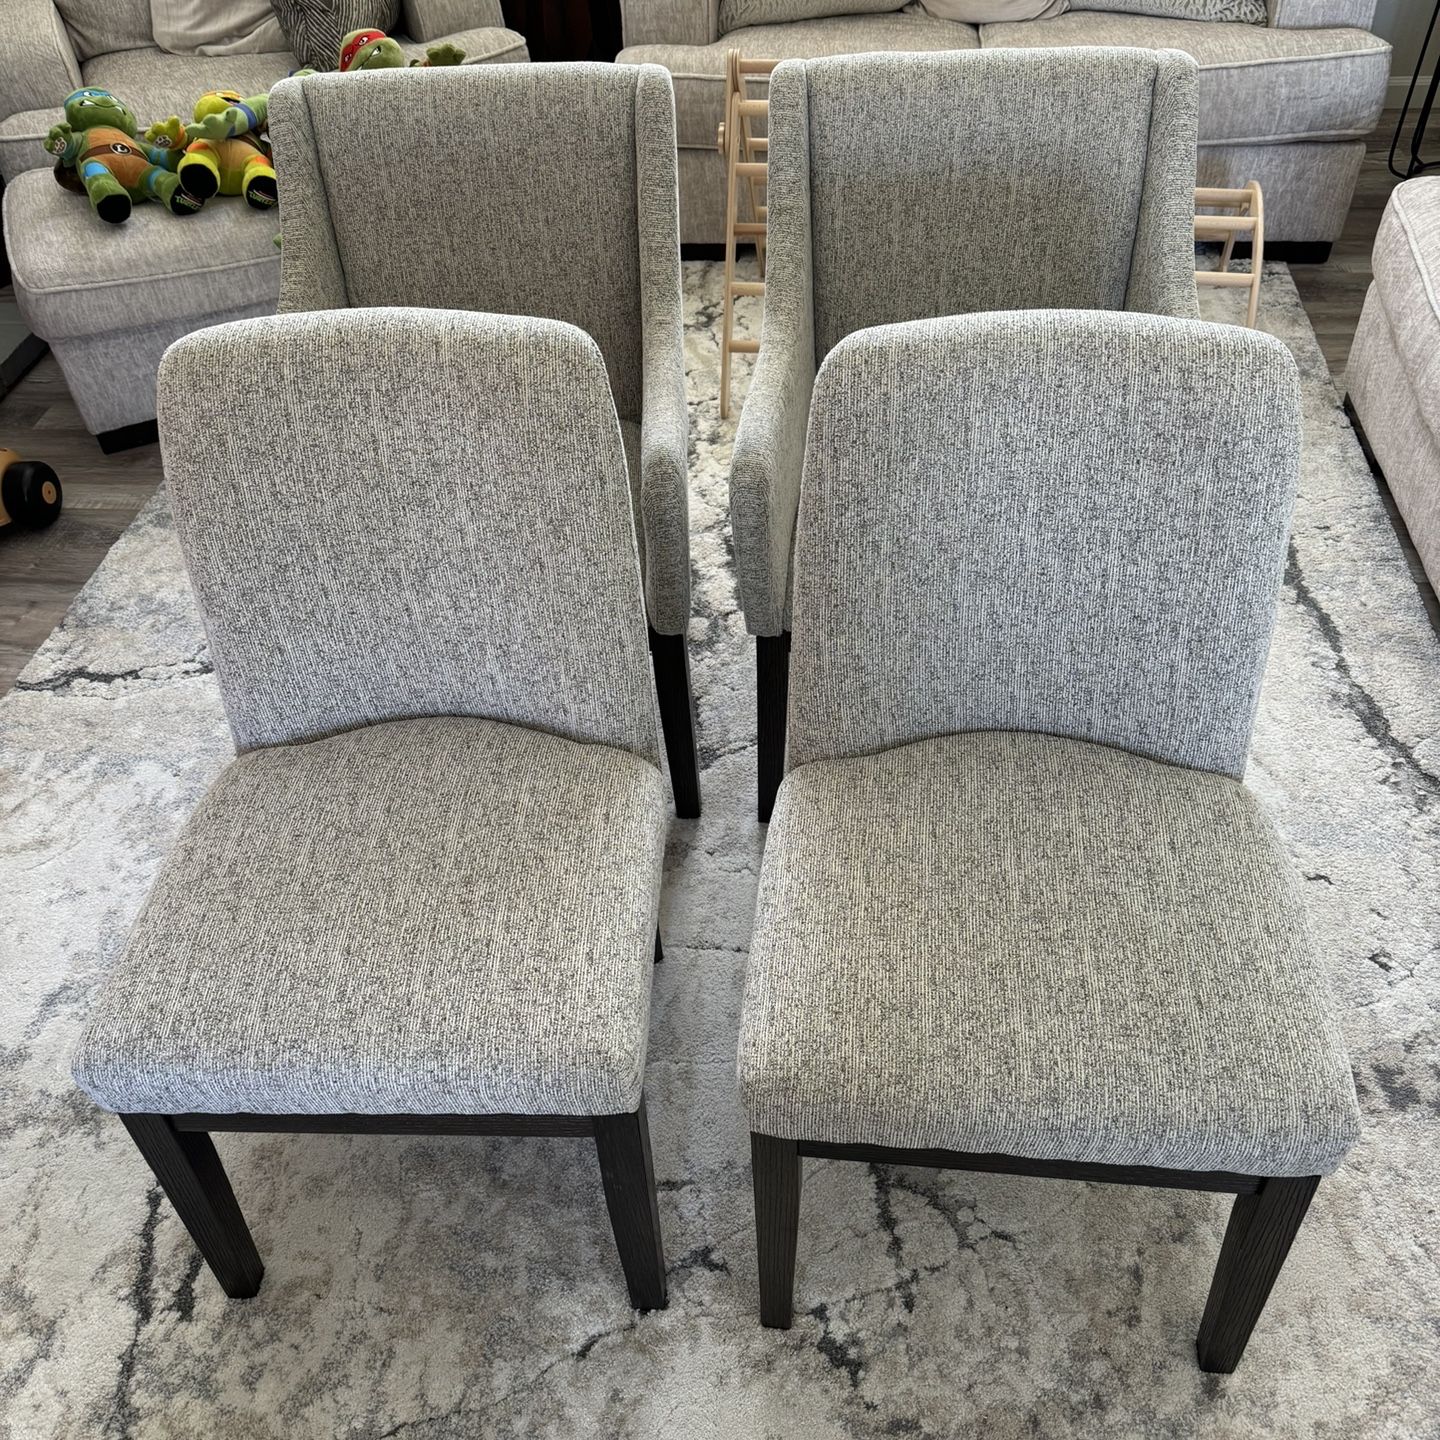 Gently Used Dining Chairs 